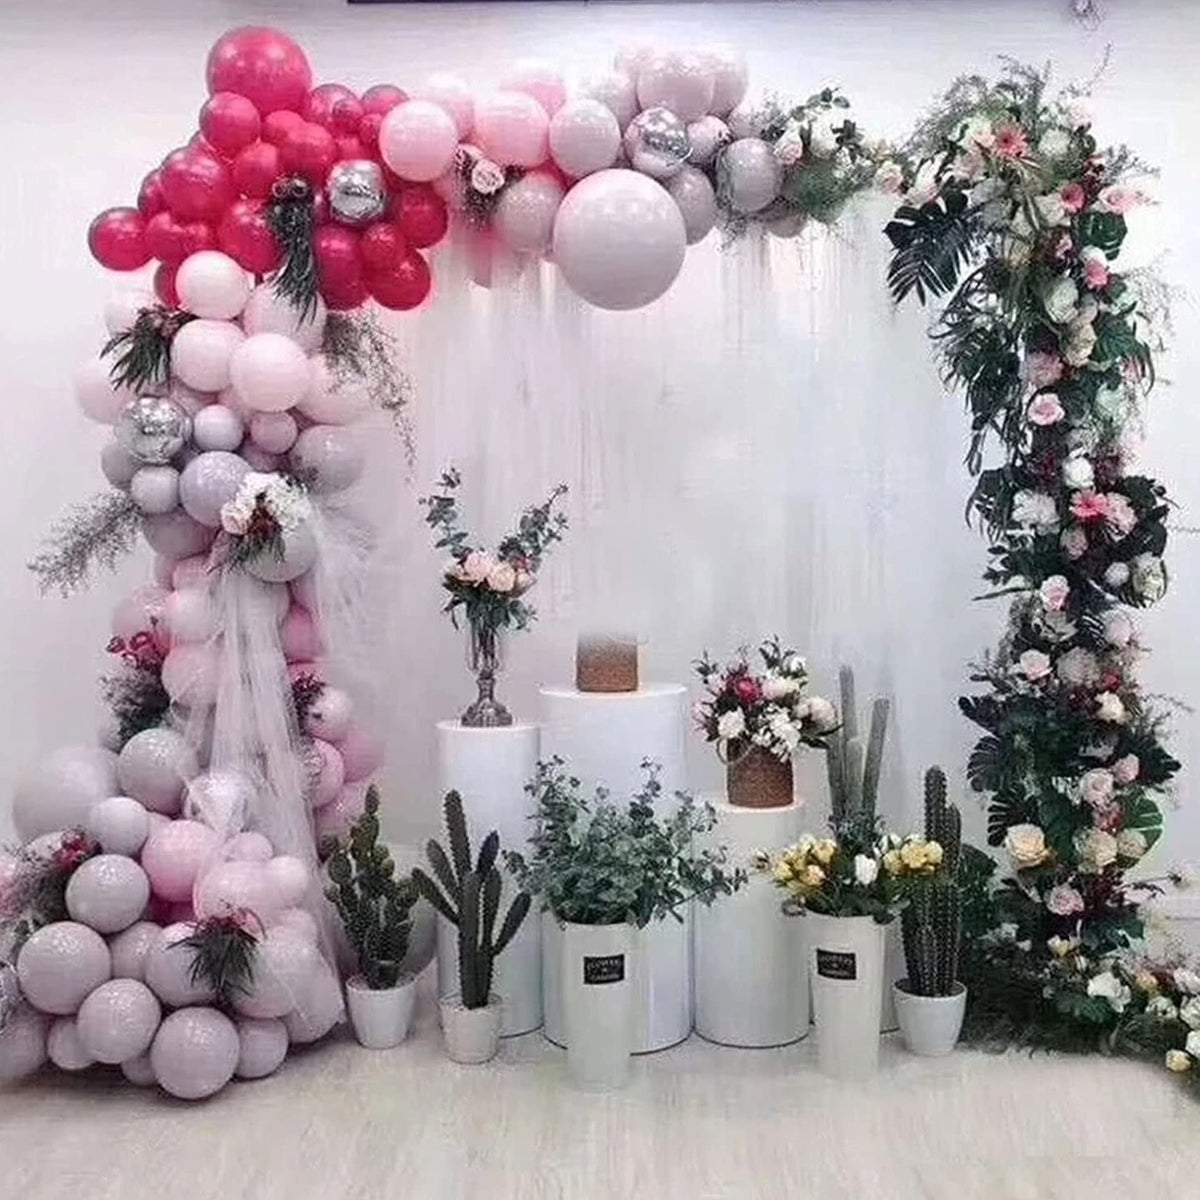 Iron Party Stand Flower Stand Wedding Arch Party Birthday Backdrop HJ9117